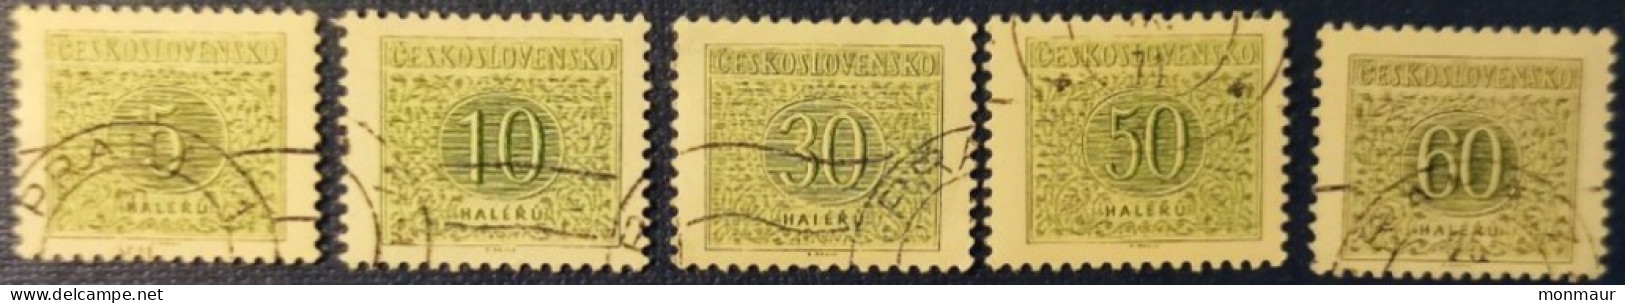 CECOSLOVACCHIA 1963 TIMBRE TAXE Yt 92-93-94-95-96 DENT. 11 1/2 - Postage Due